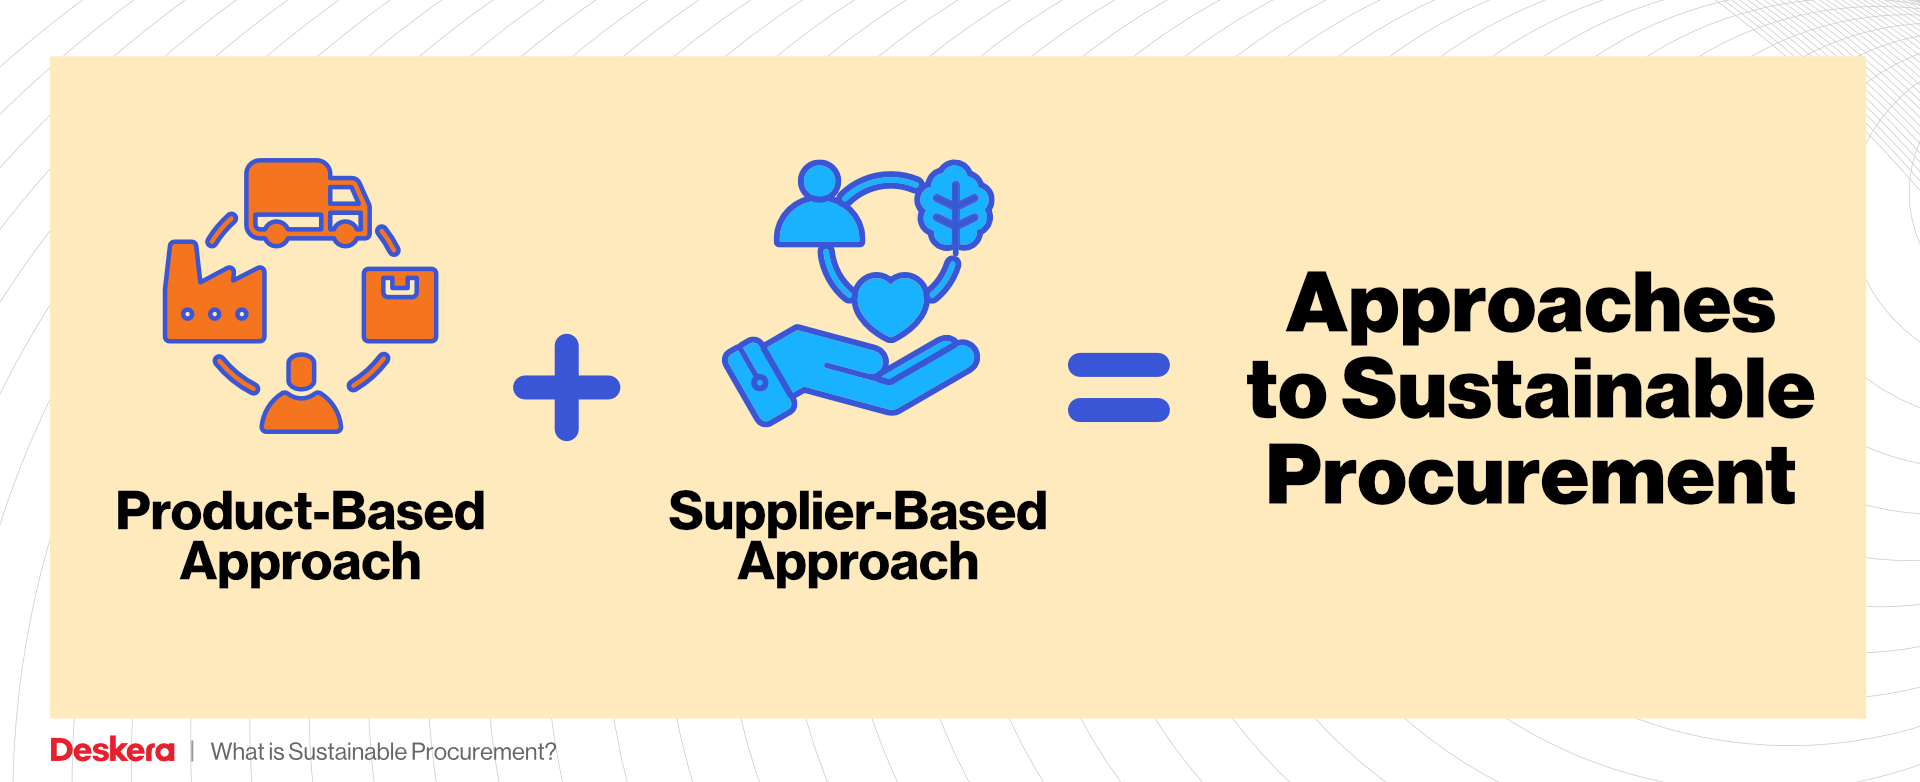 Approaches to Sustainable Procurement